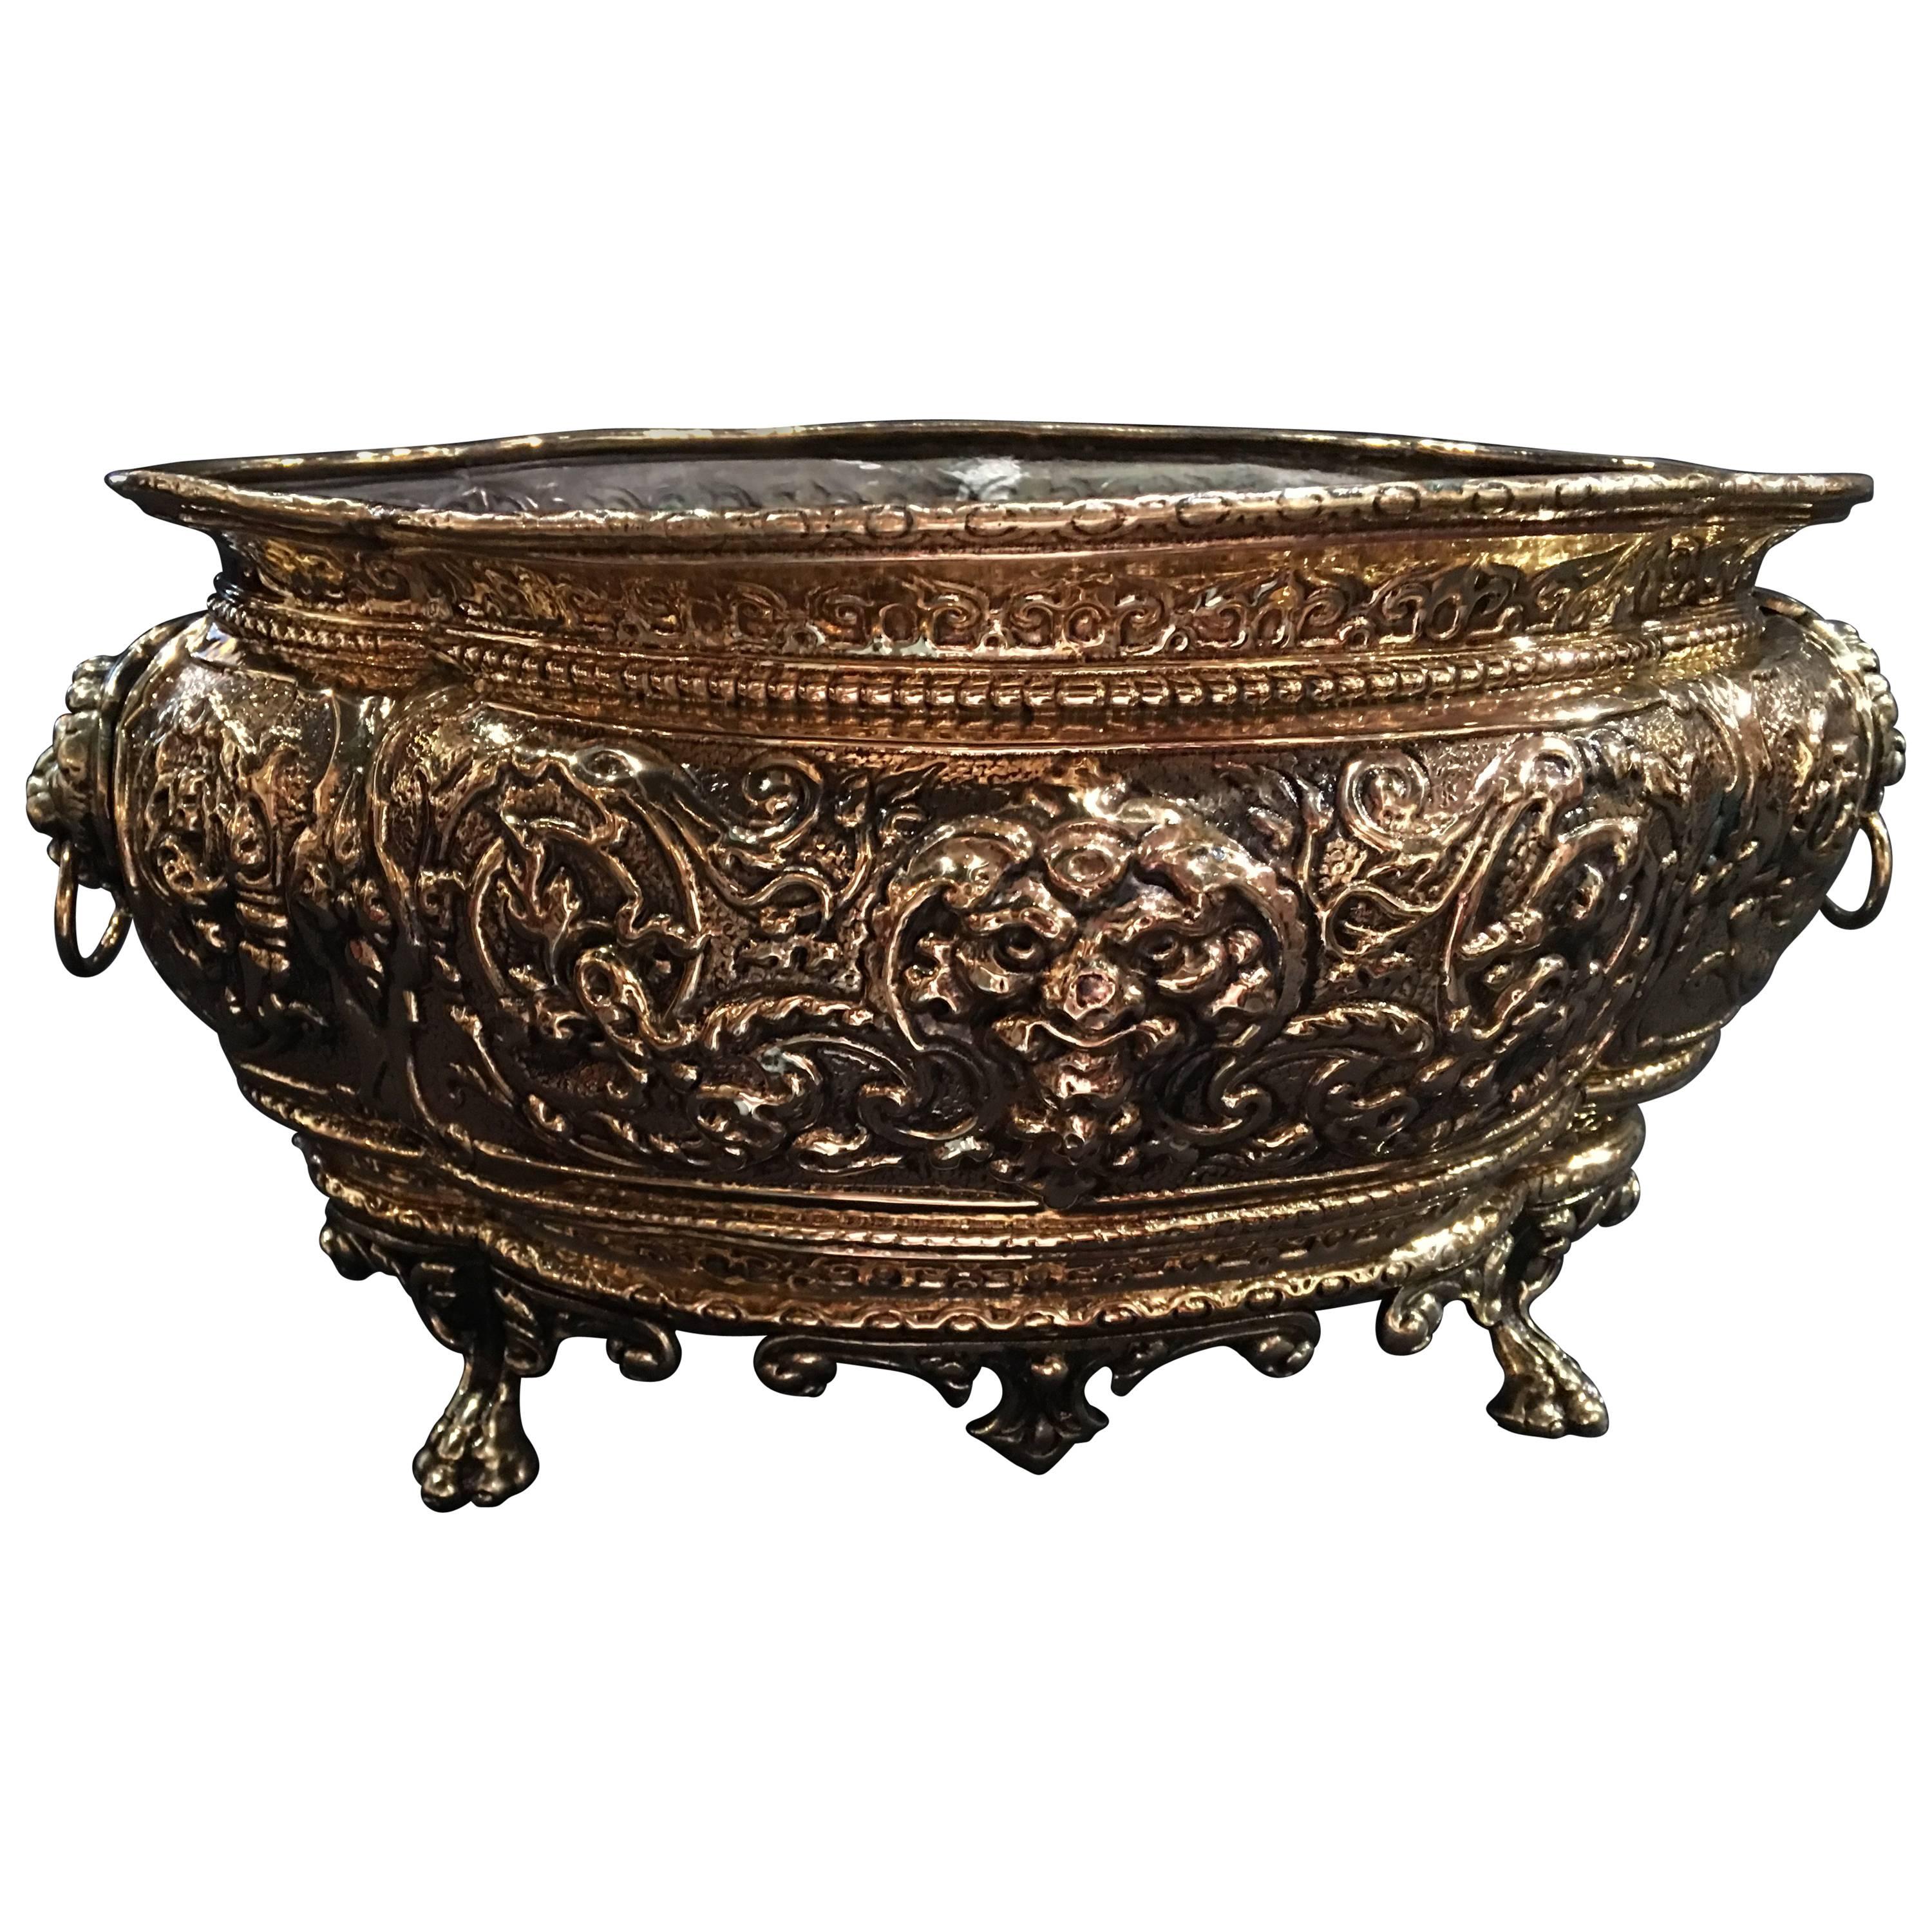 French Polished Brass Jardiniere or Planter on Paw Feet, 19th Century